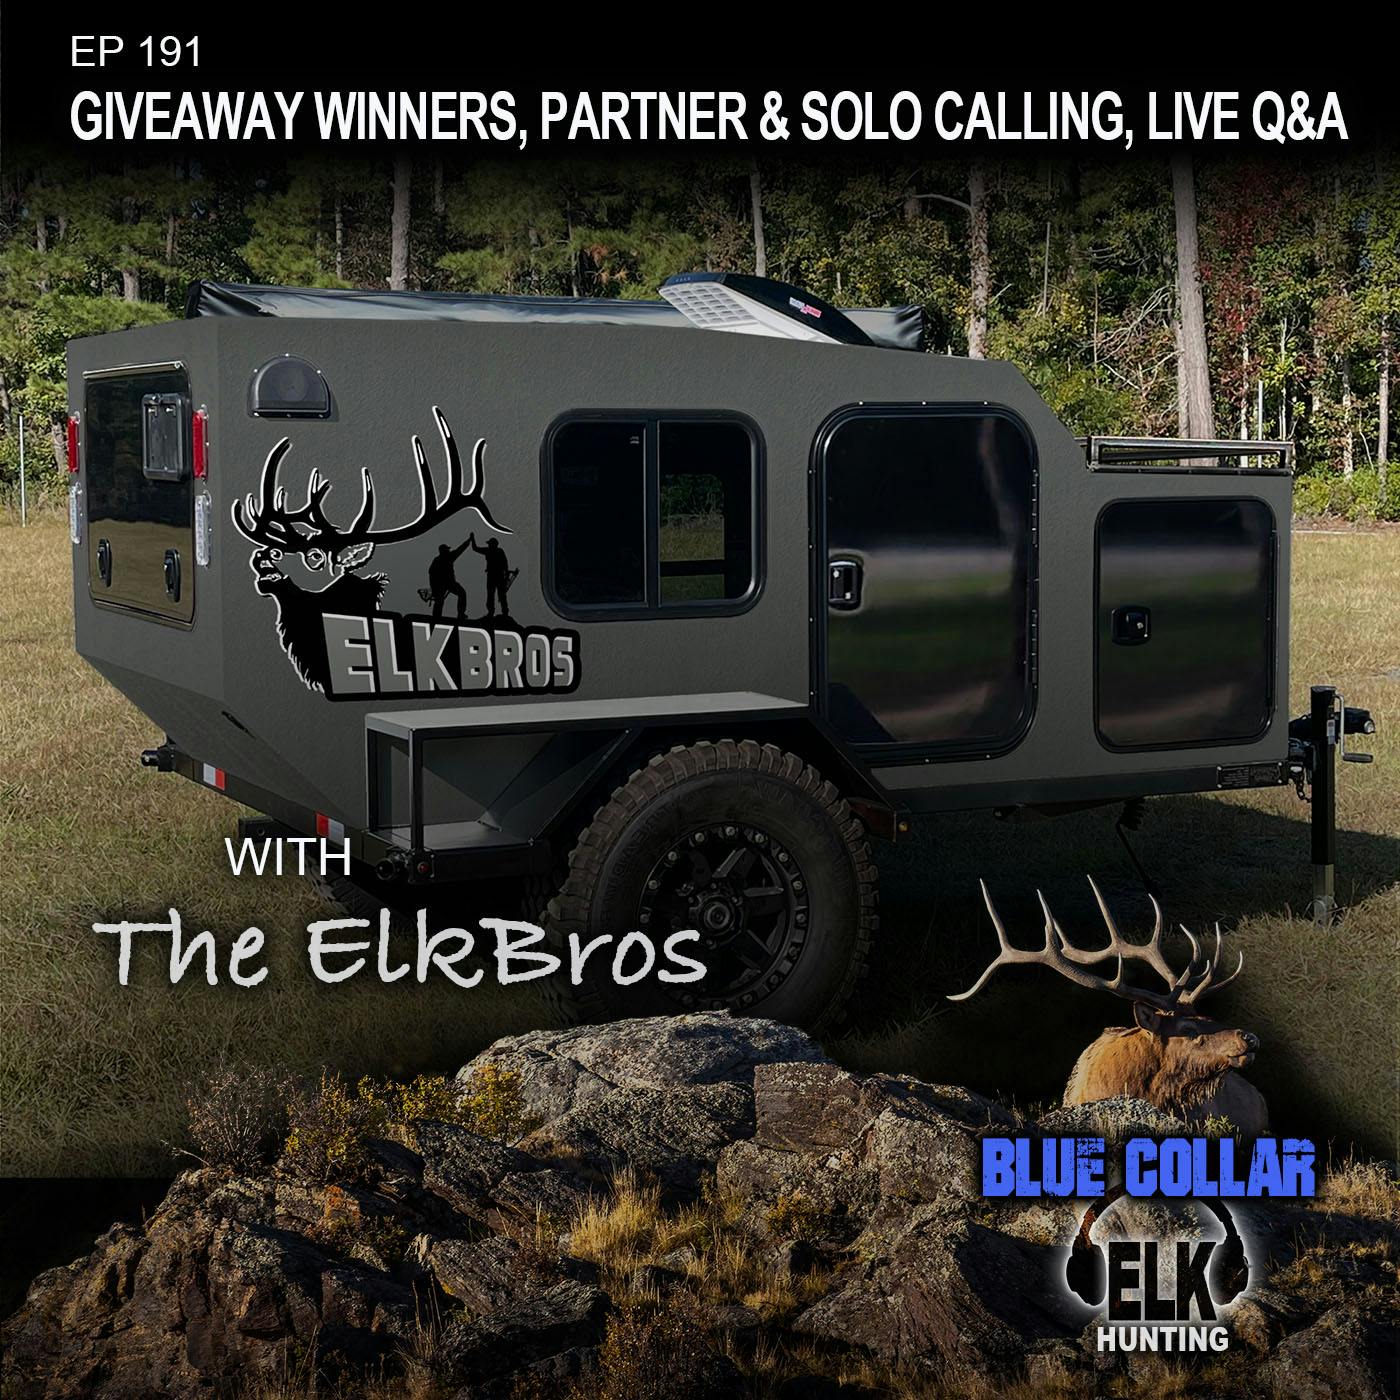 EP 191: Giveaway Winners, Partner & Solo Calling, Live Q&A